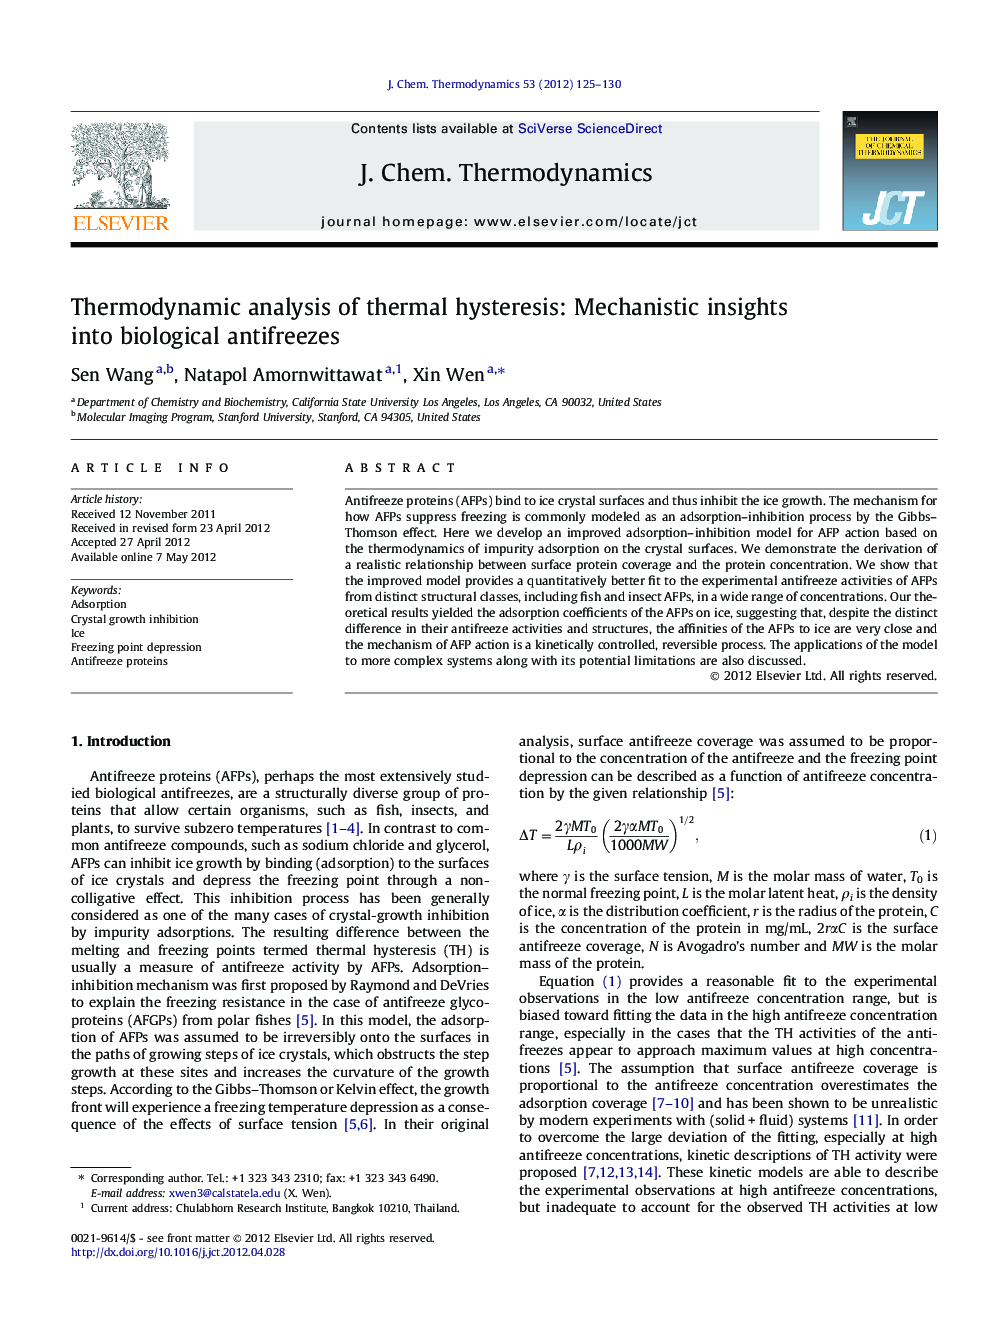 Thermodynamic analysis of thermal hysteresis: Mechanistic insights into biological antifreezes